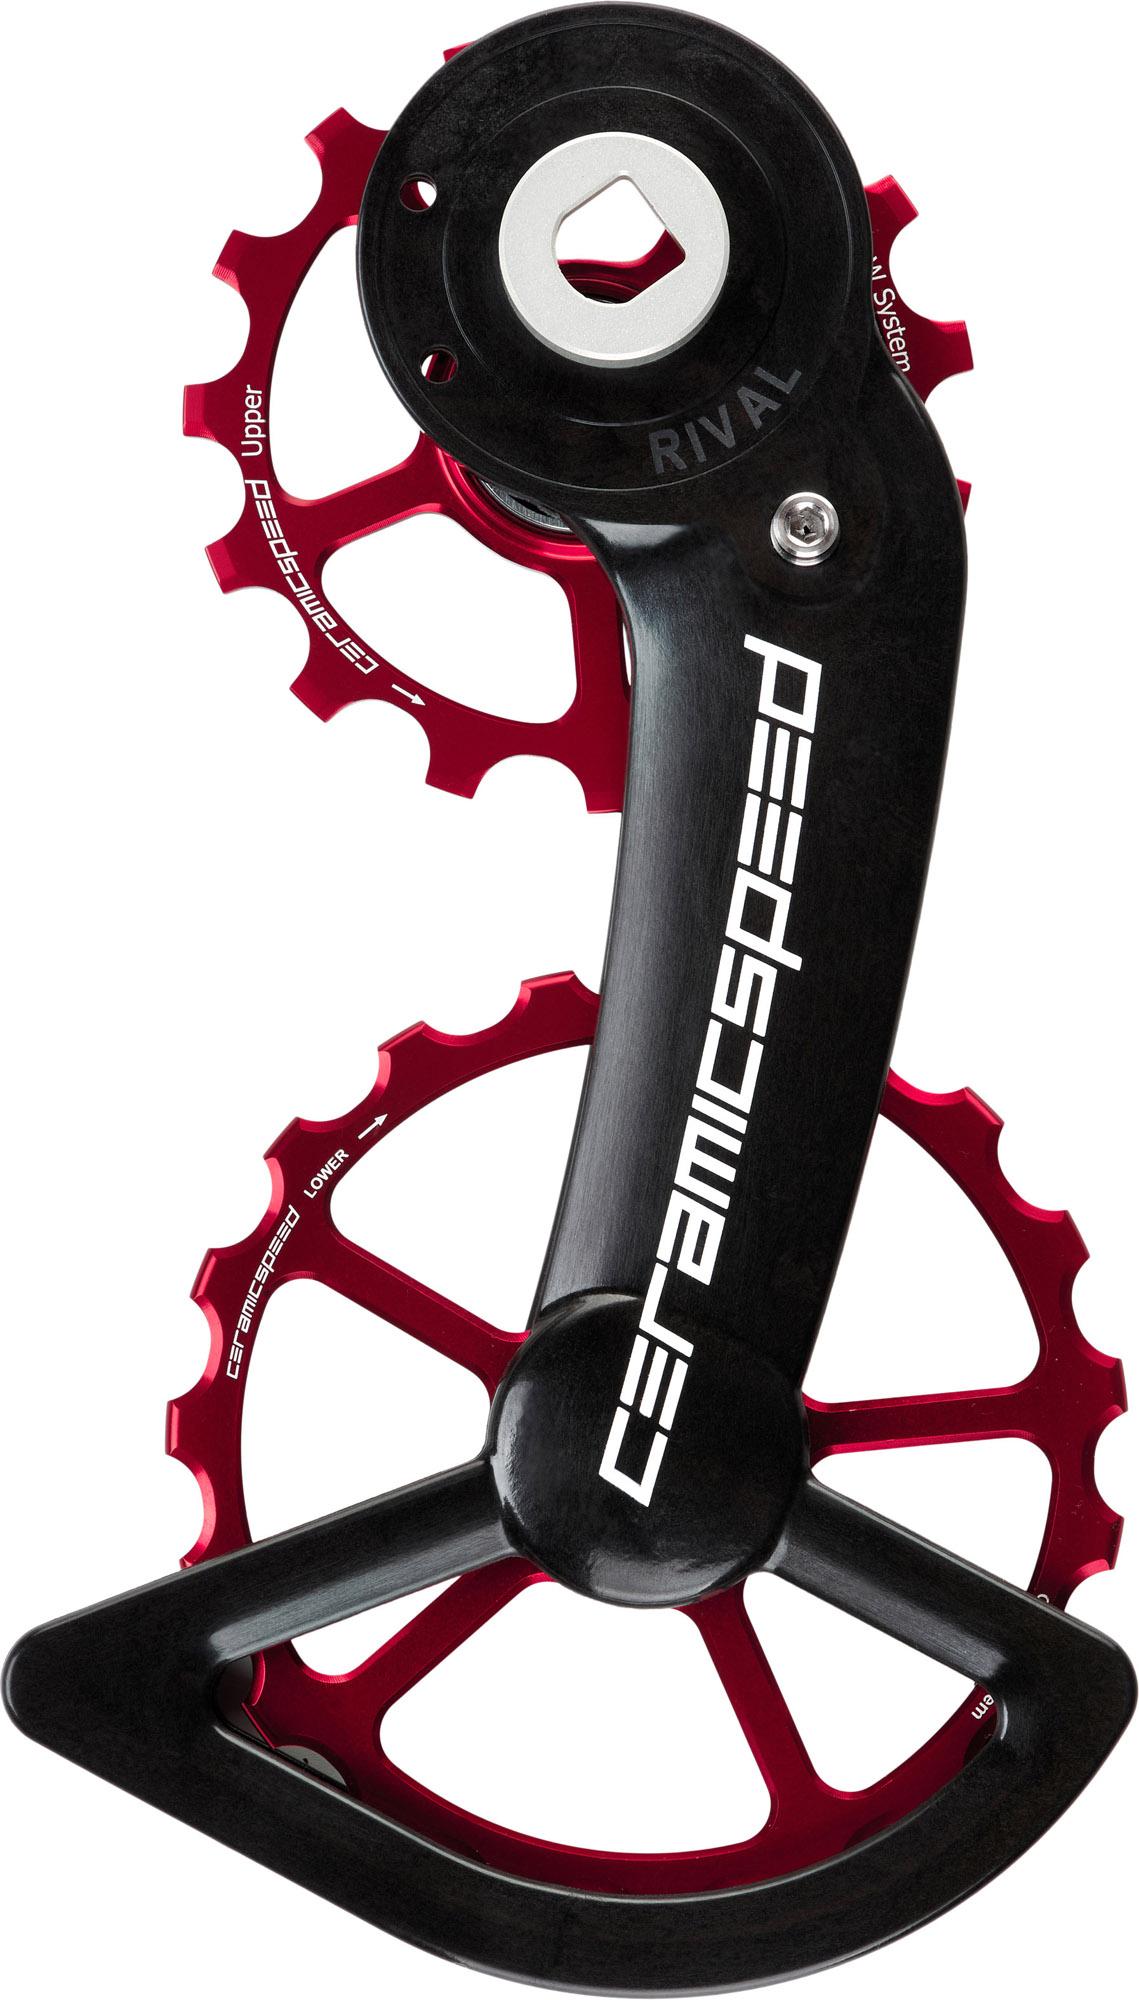 Ceramicspeed Ospw System Sram Rival Axs  Red